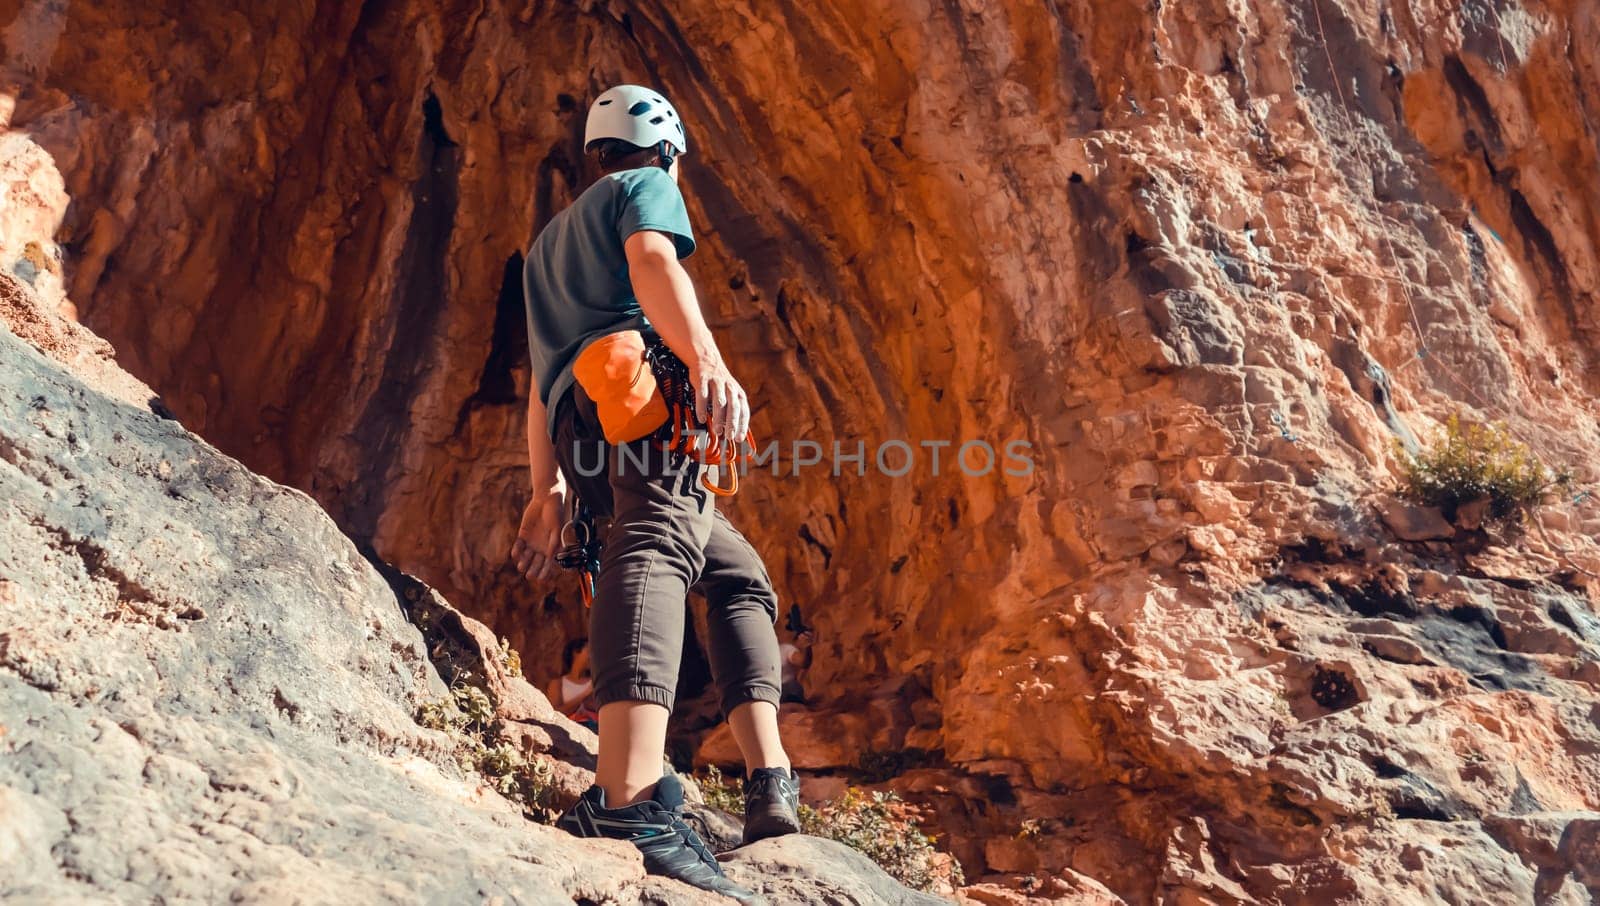 A man is engaged in rock climbing, stands against the background of a beautiful red cave before training, the climber leads an active lifestyle and is involved in extreme sports.